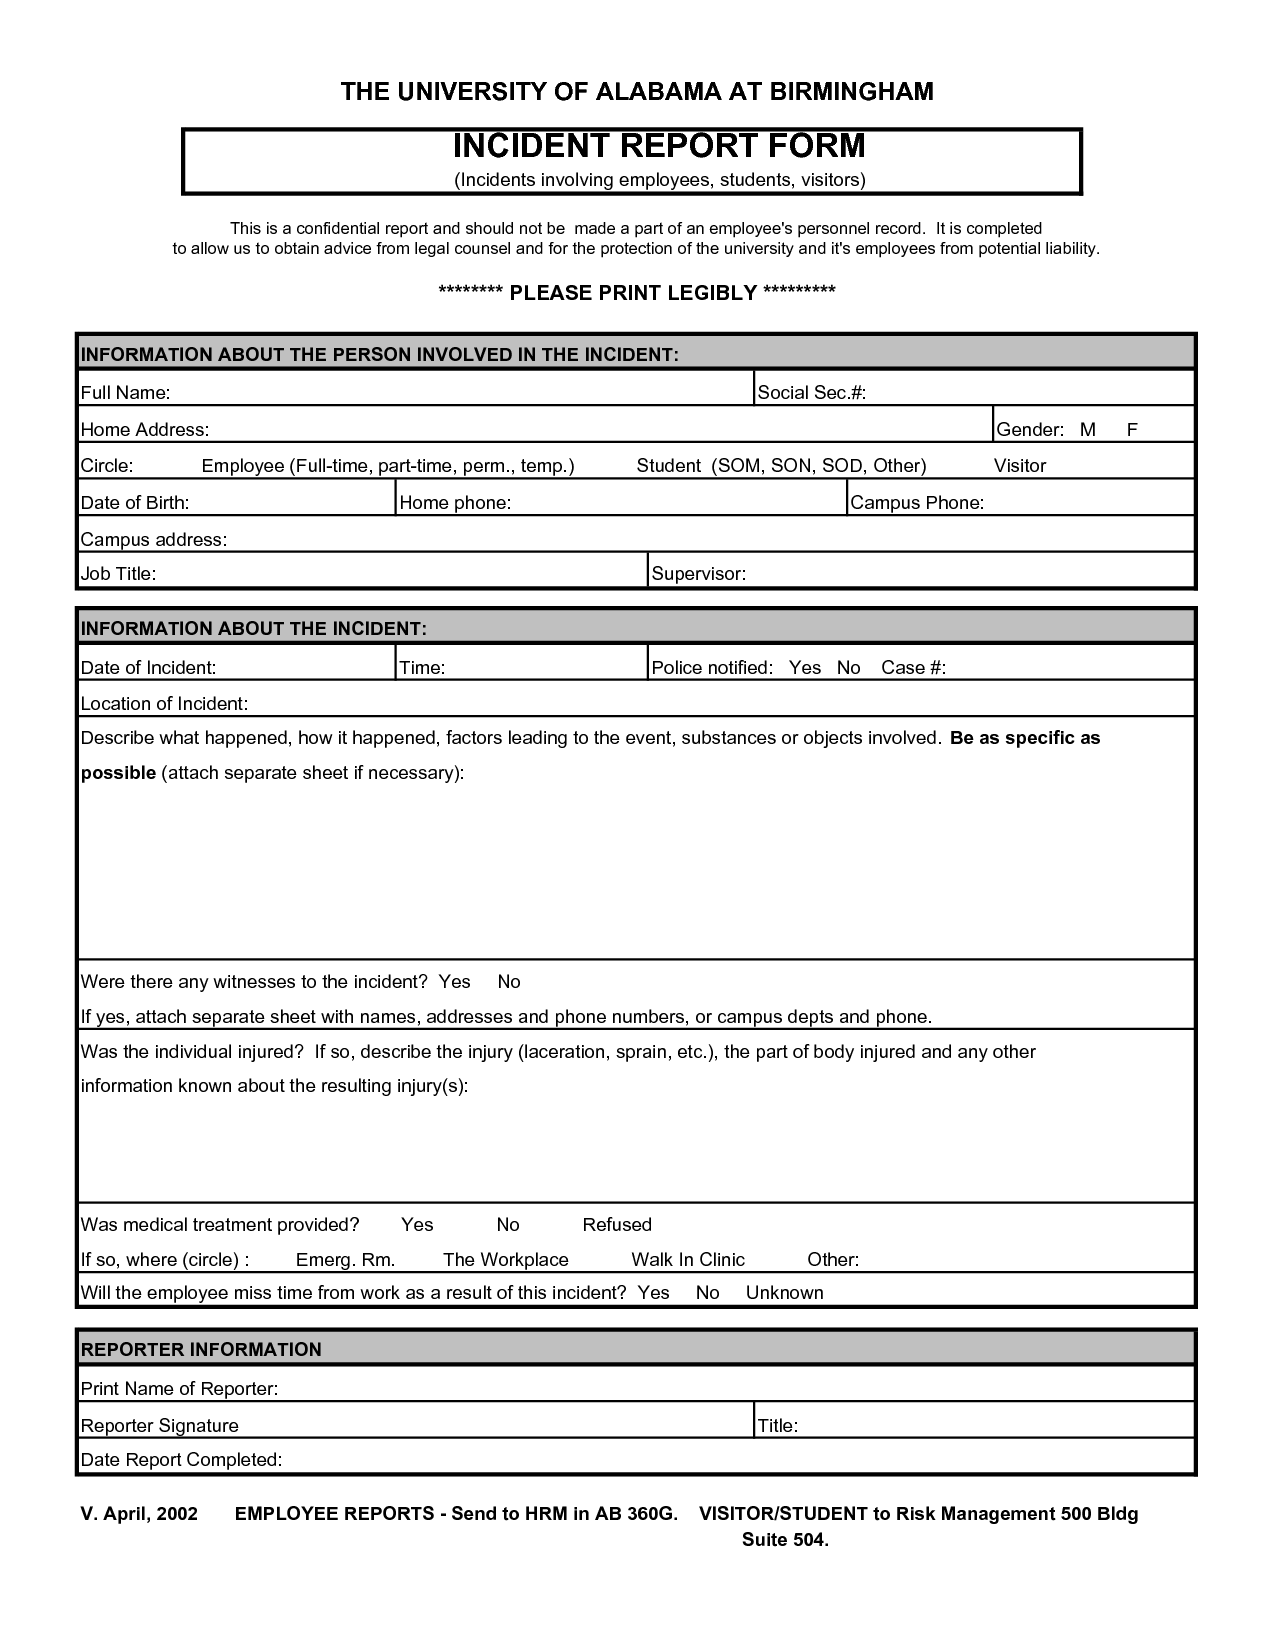 accident report form template   Tier.brianhenry.co